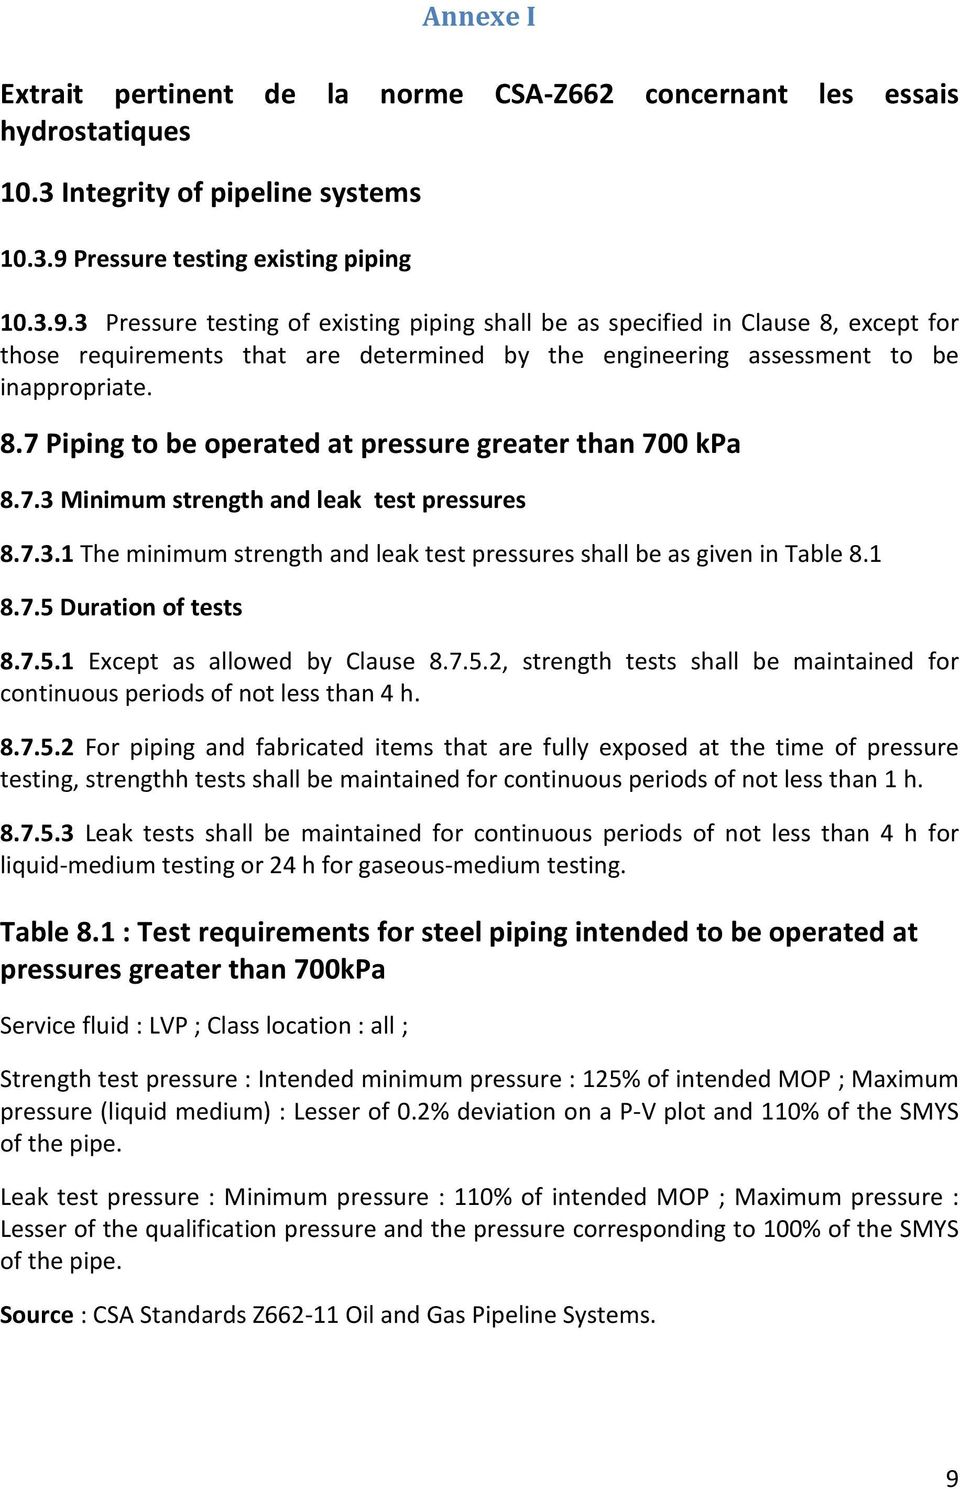 3 Pressure testing of existing piping shall be as specified in Clause 8, except for those requirements that are determined by the engineering assessment to be inappropriate. 8.7 Piping to be operated at pressure greater than 700 kpa 8.